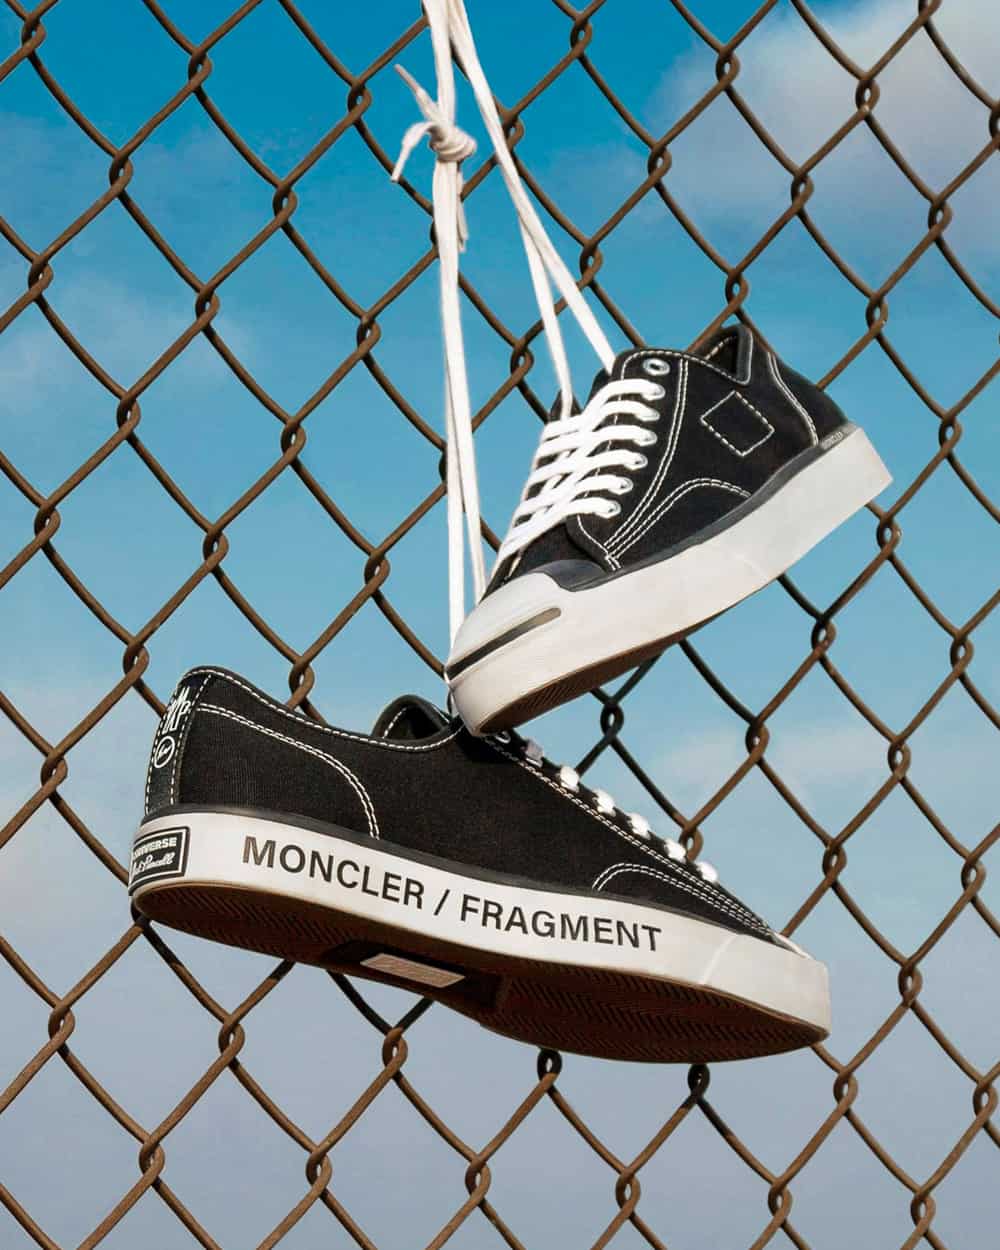 A pair of Moncler x Fragment black low-top canvas sneakers hanging on wire fence by laces